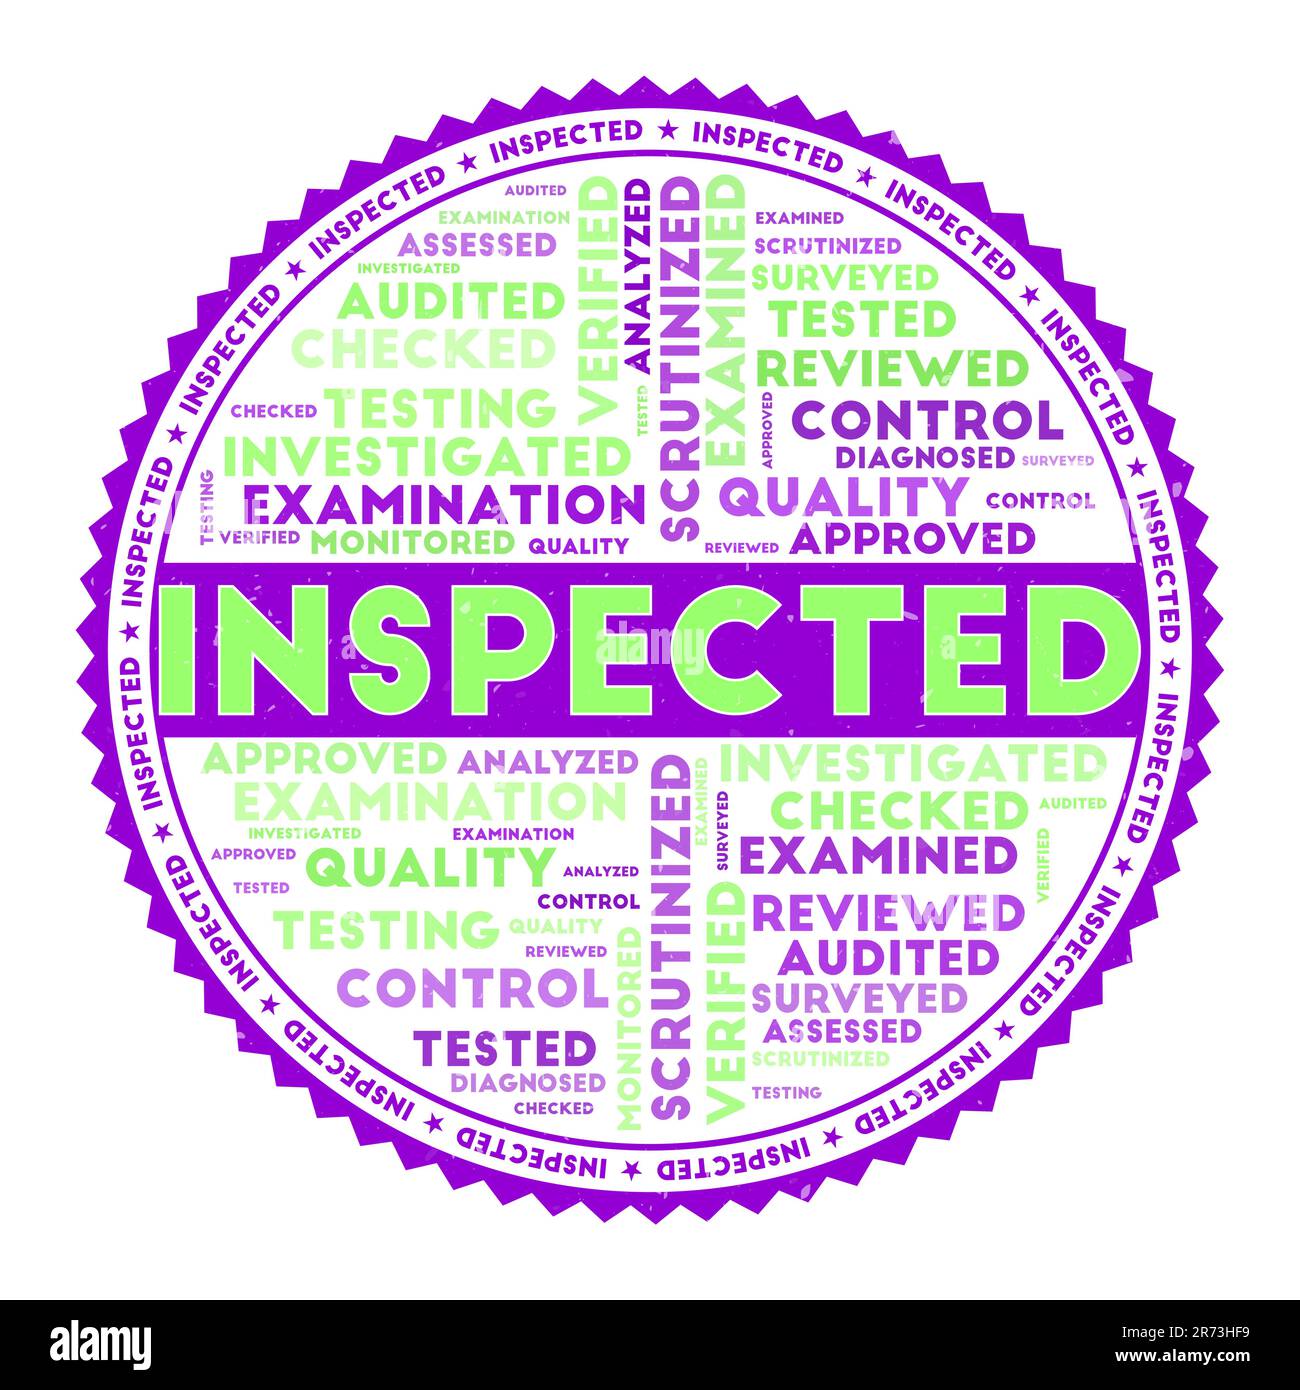 INSPECTED word image. Inspected concept with word clouds and round text. Nice colors and grunge texture. Superb vector illustration. Stock Vector